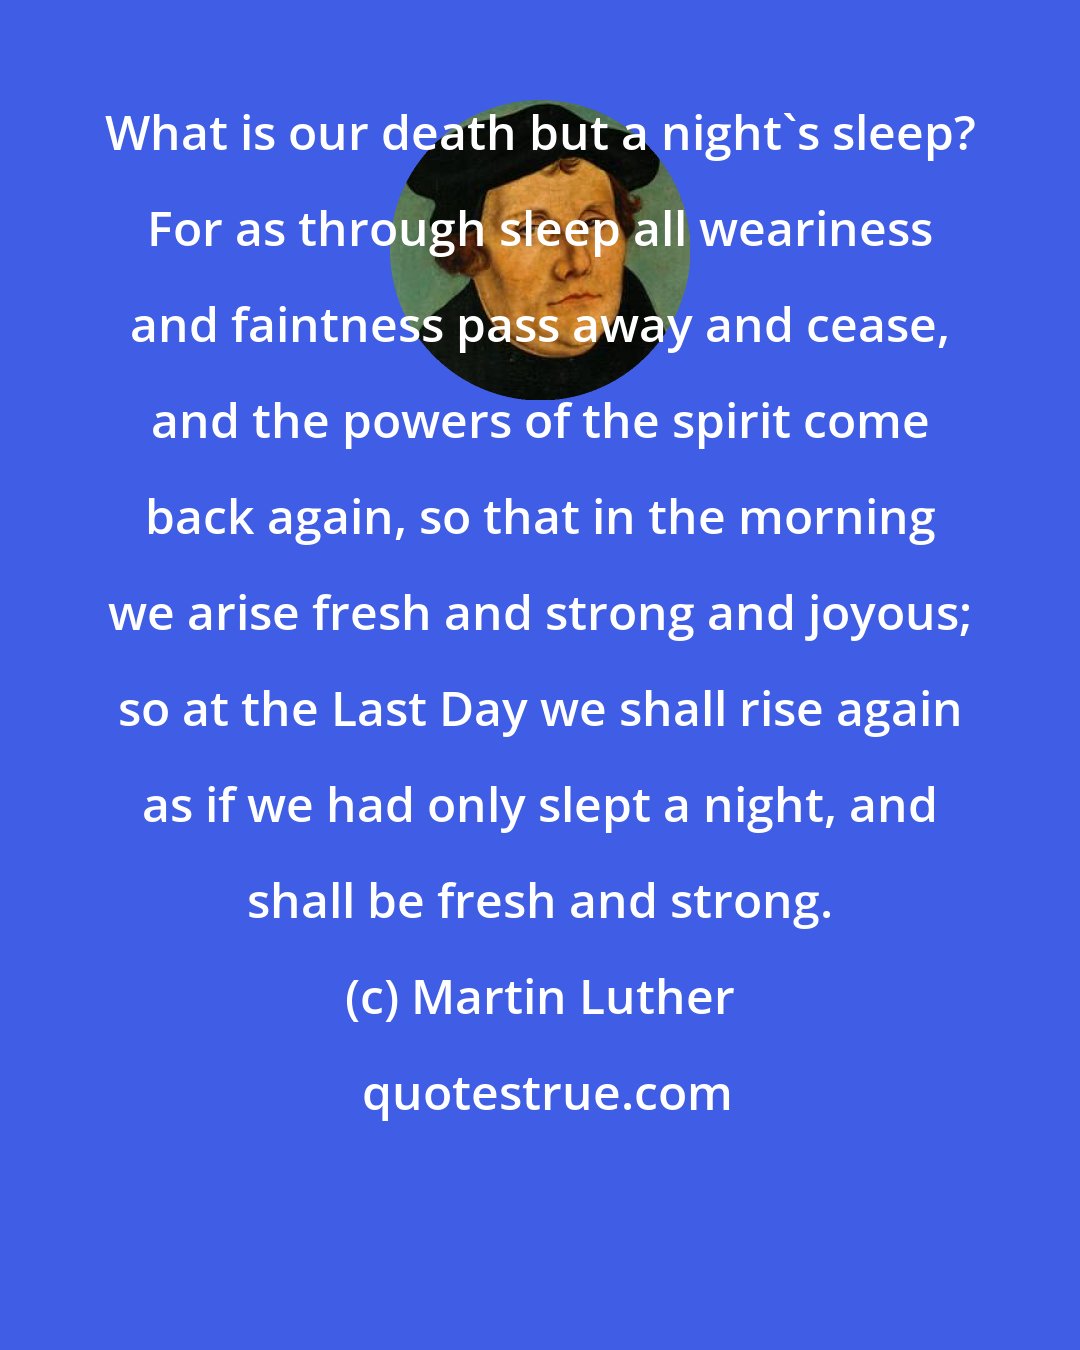 Martin Luther: What is our death but a night's sleep? For as through sleep all weariness and faintness pass away and cease, and the powers of the spirit come back again, so that in the morning we arise fresh and strong and joyous; so at the Last Day we shall rise again as if we had only slept a night, and shall be fresh and strong.